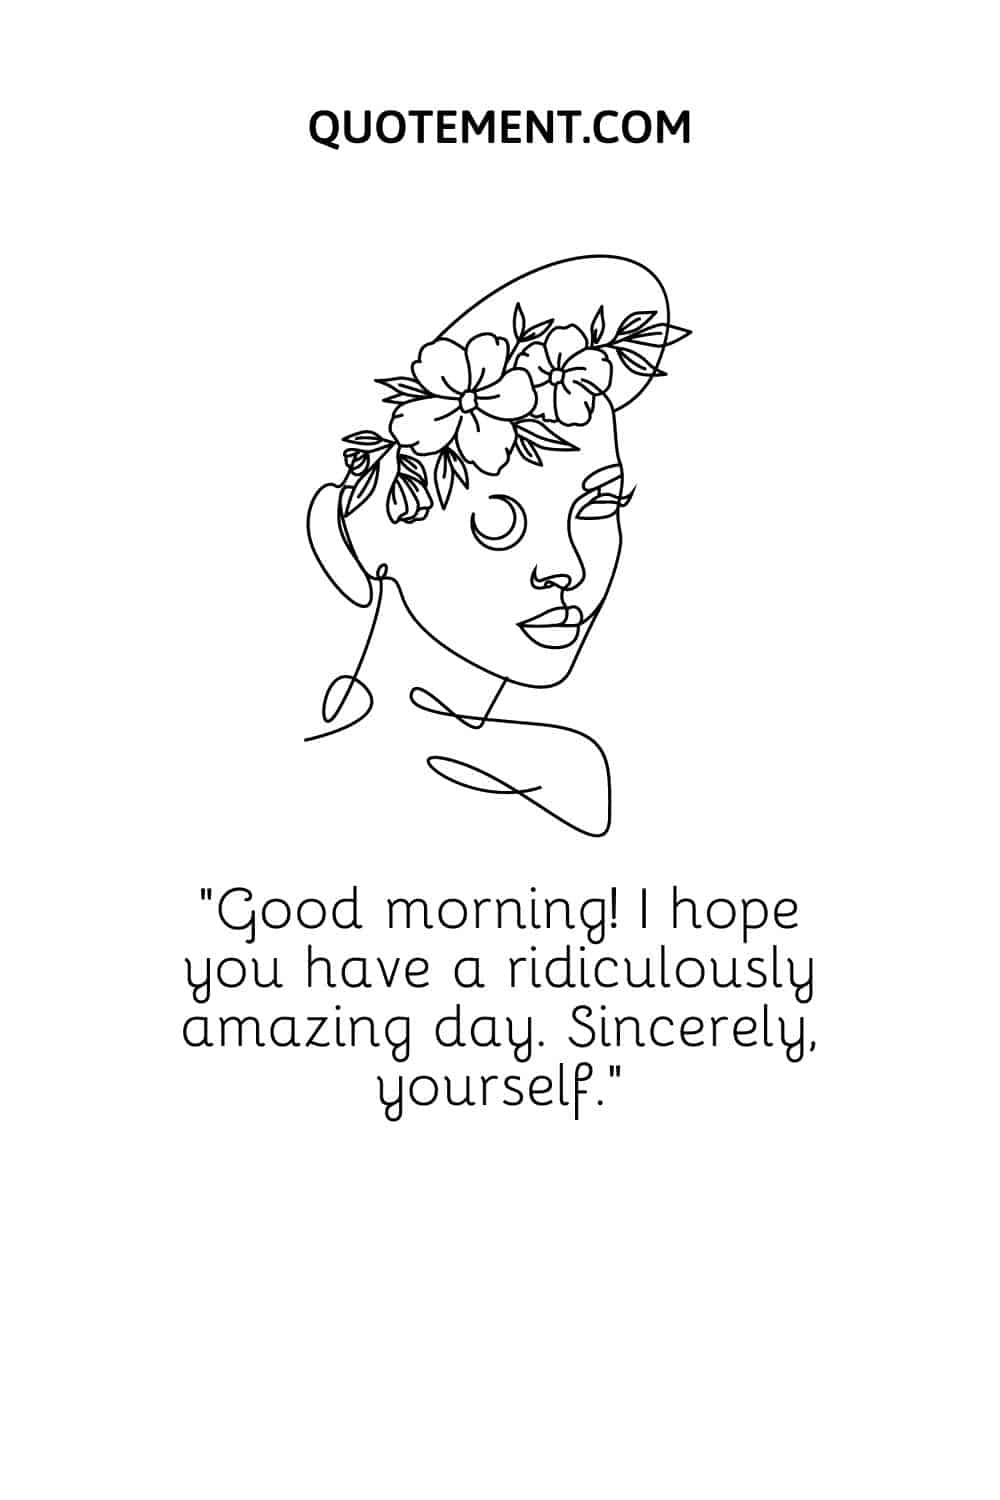 Good morning! I hope you have a ridiculously amazing day. Sincerely, yourself